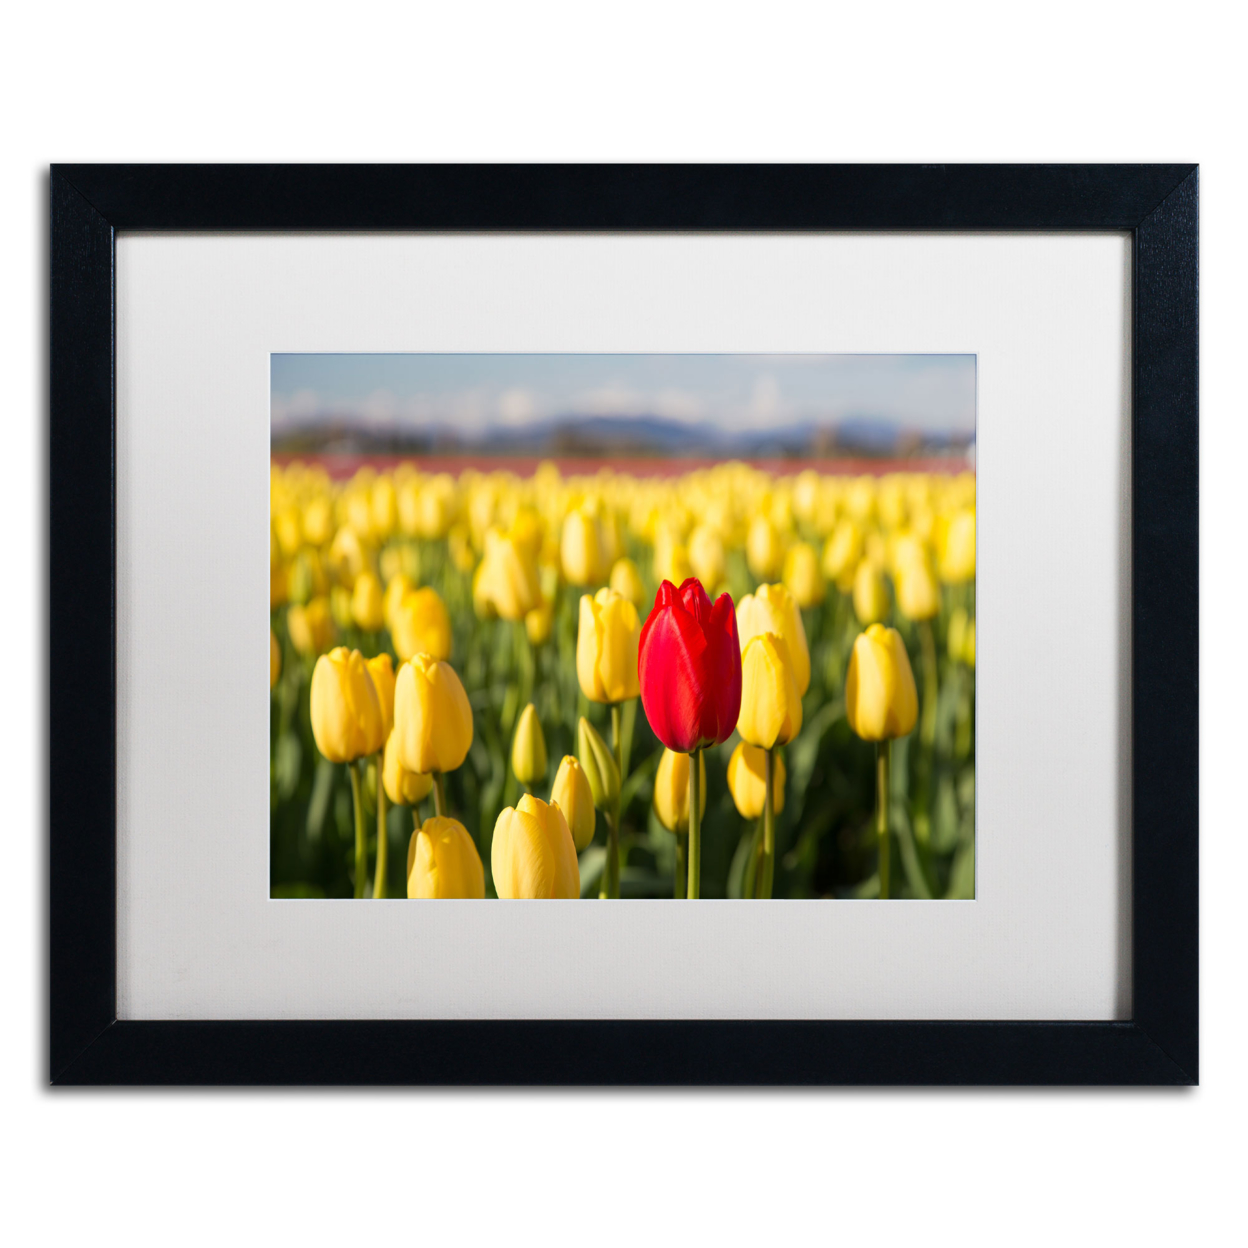 Pierre Leclerc 'Red Tulip' Black Wooden Framed Art 18 X 22 Inches